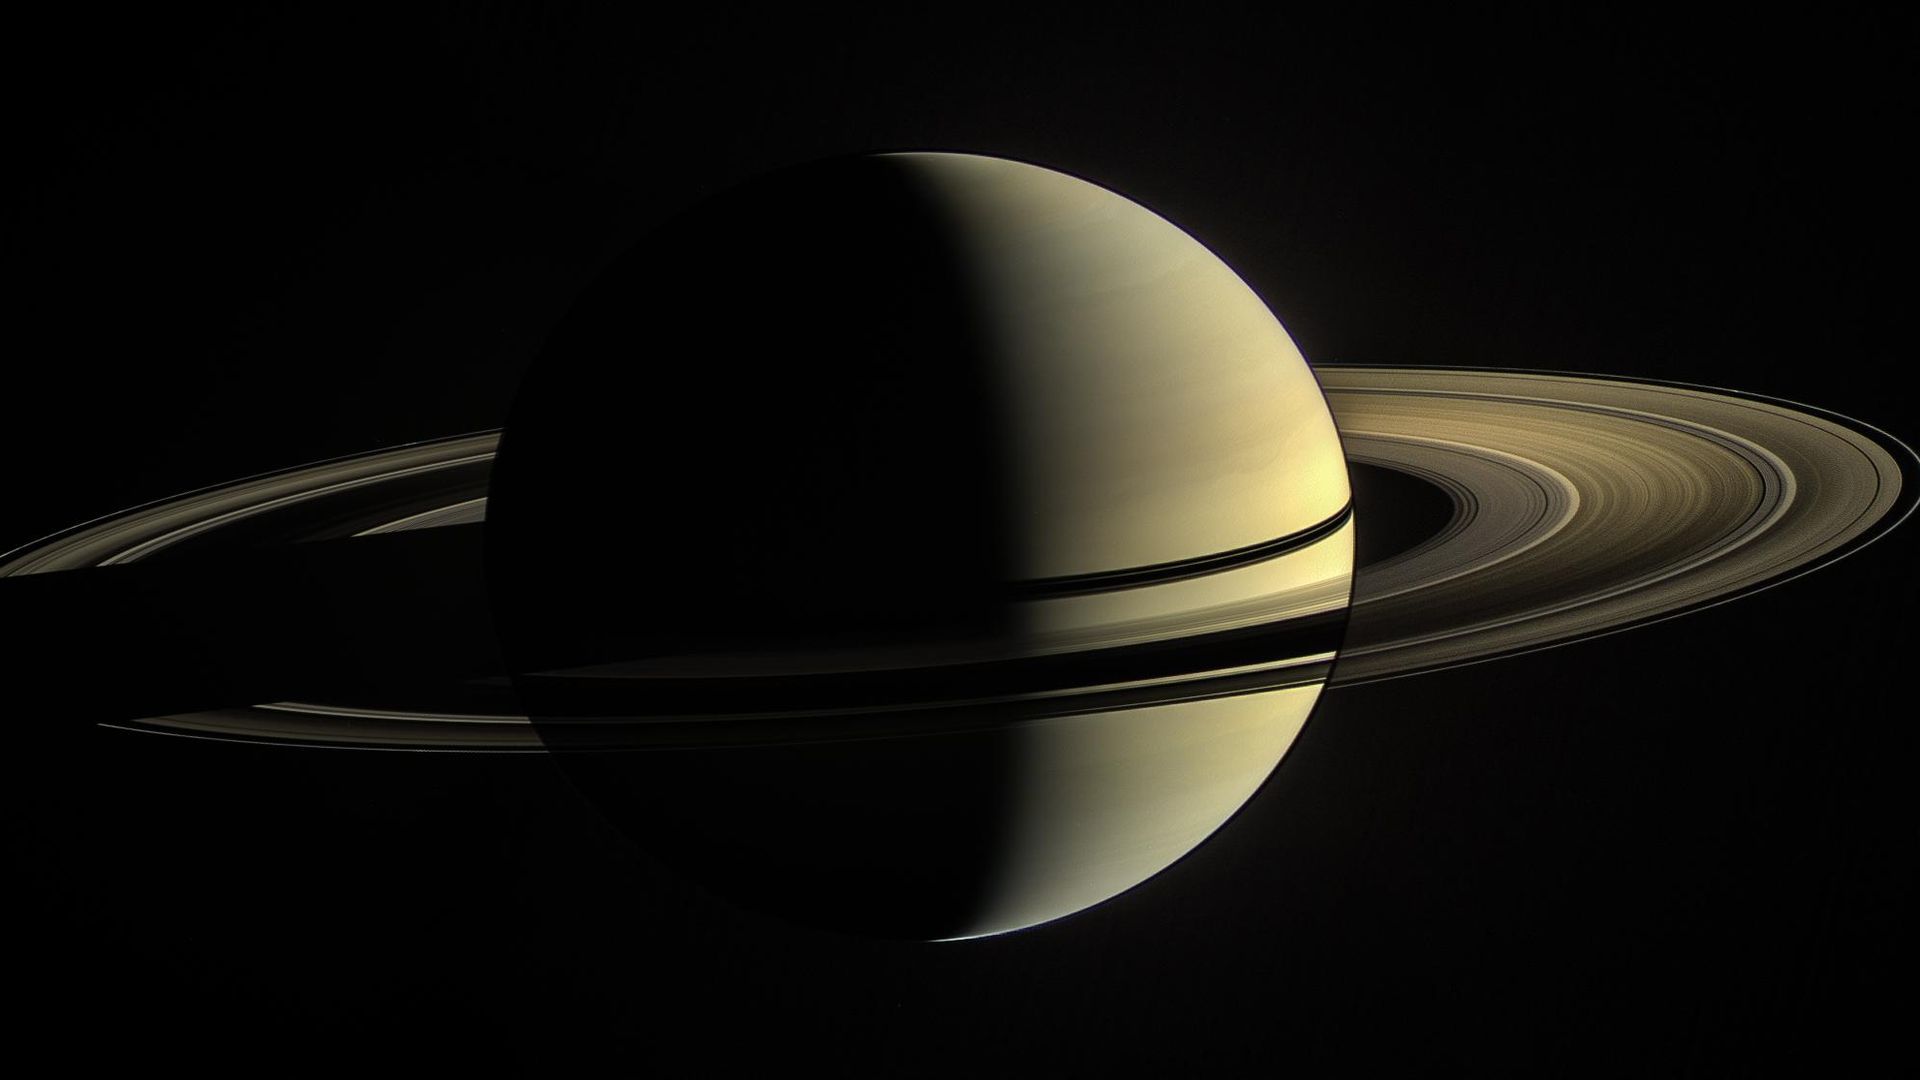 Saturn shining in yellow lit as a crescent